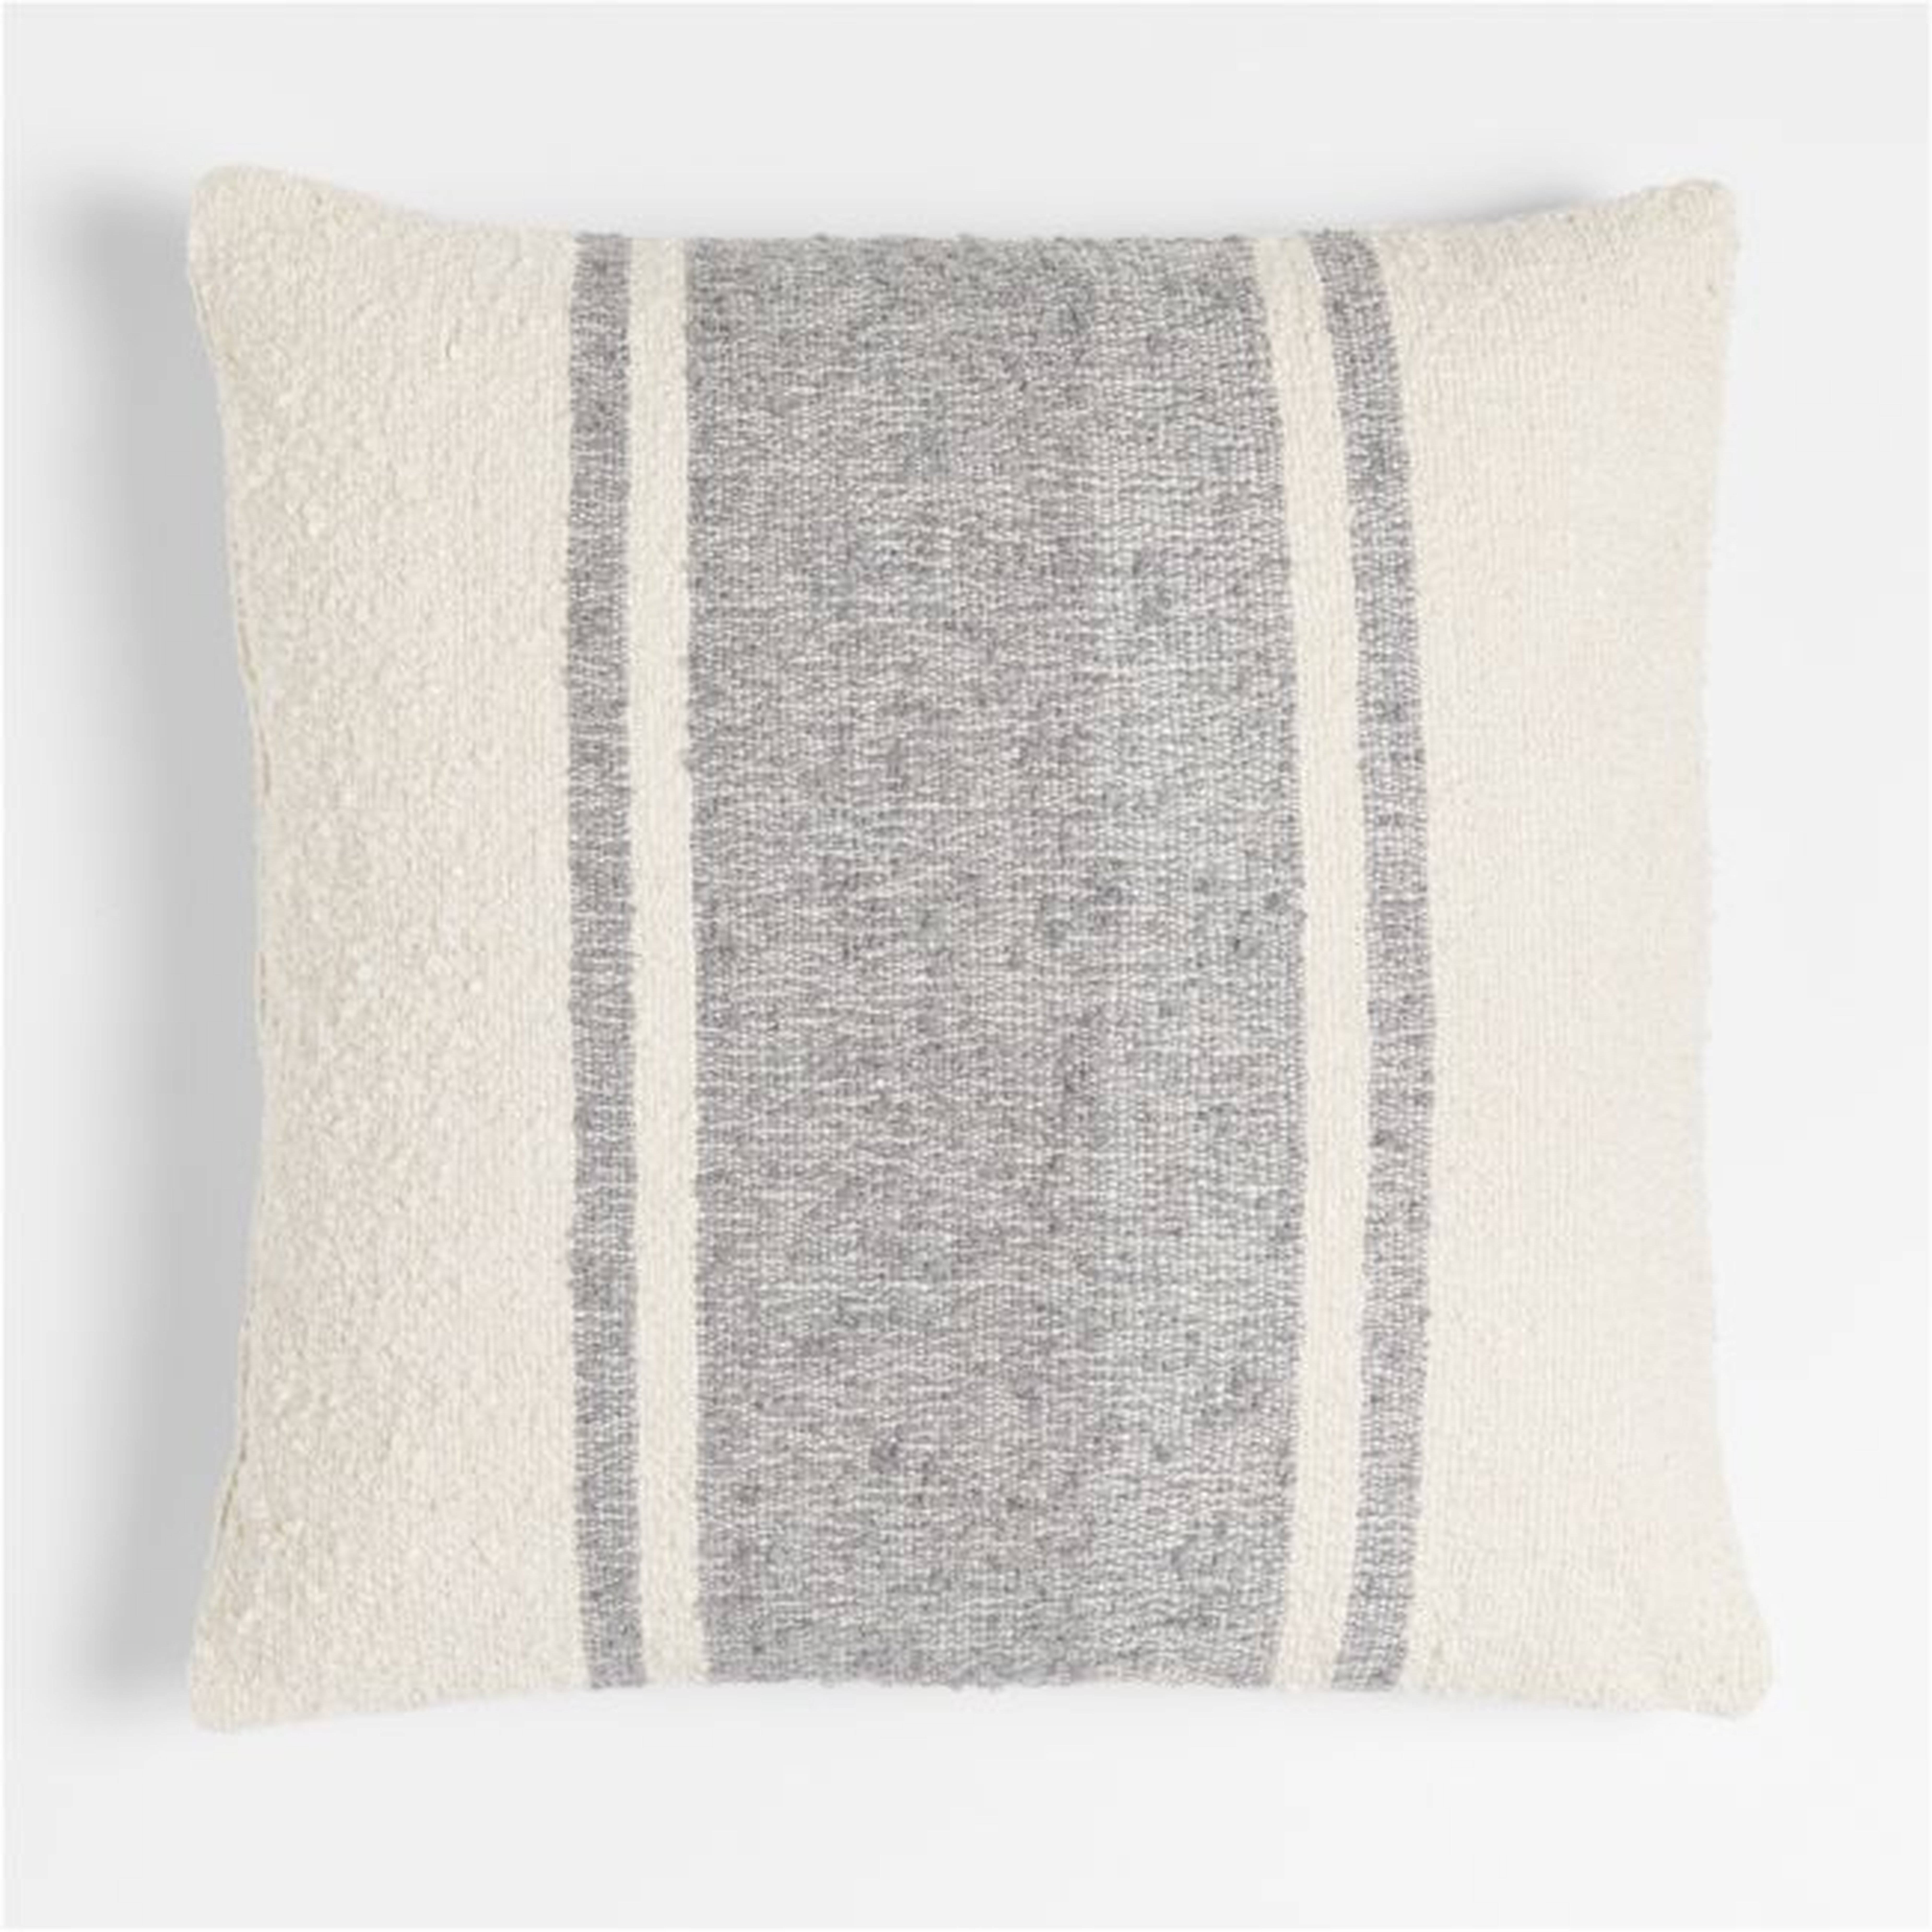 Persimmon 23"x23" Grey Stripe Outdoor Pillow by Leanne Ford - Crate and Barrel